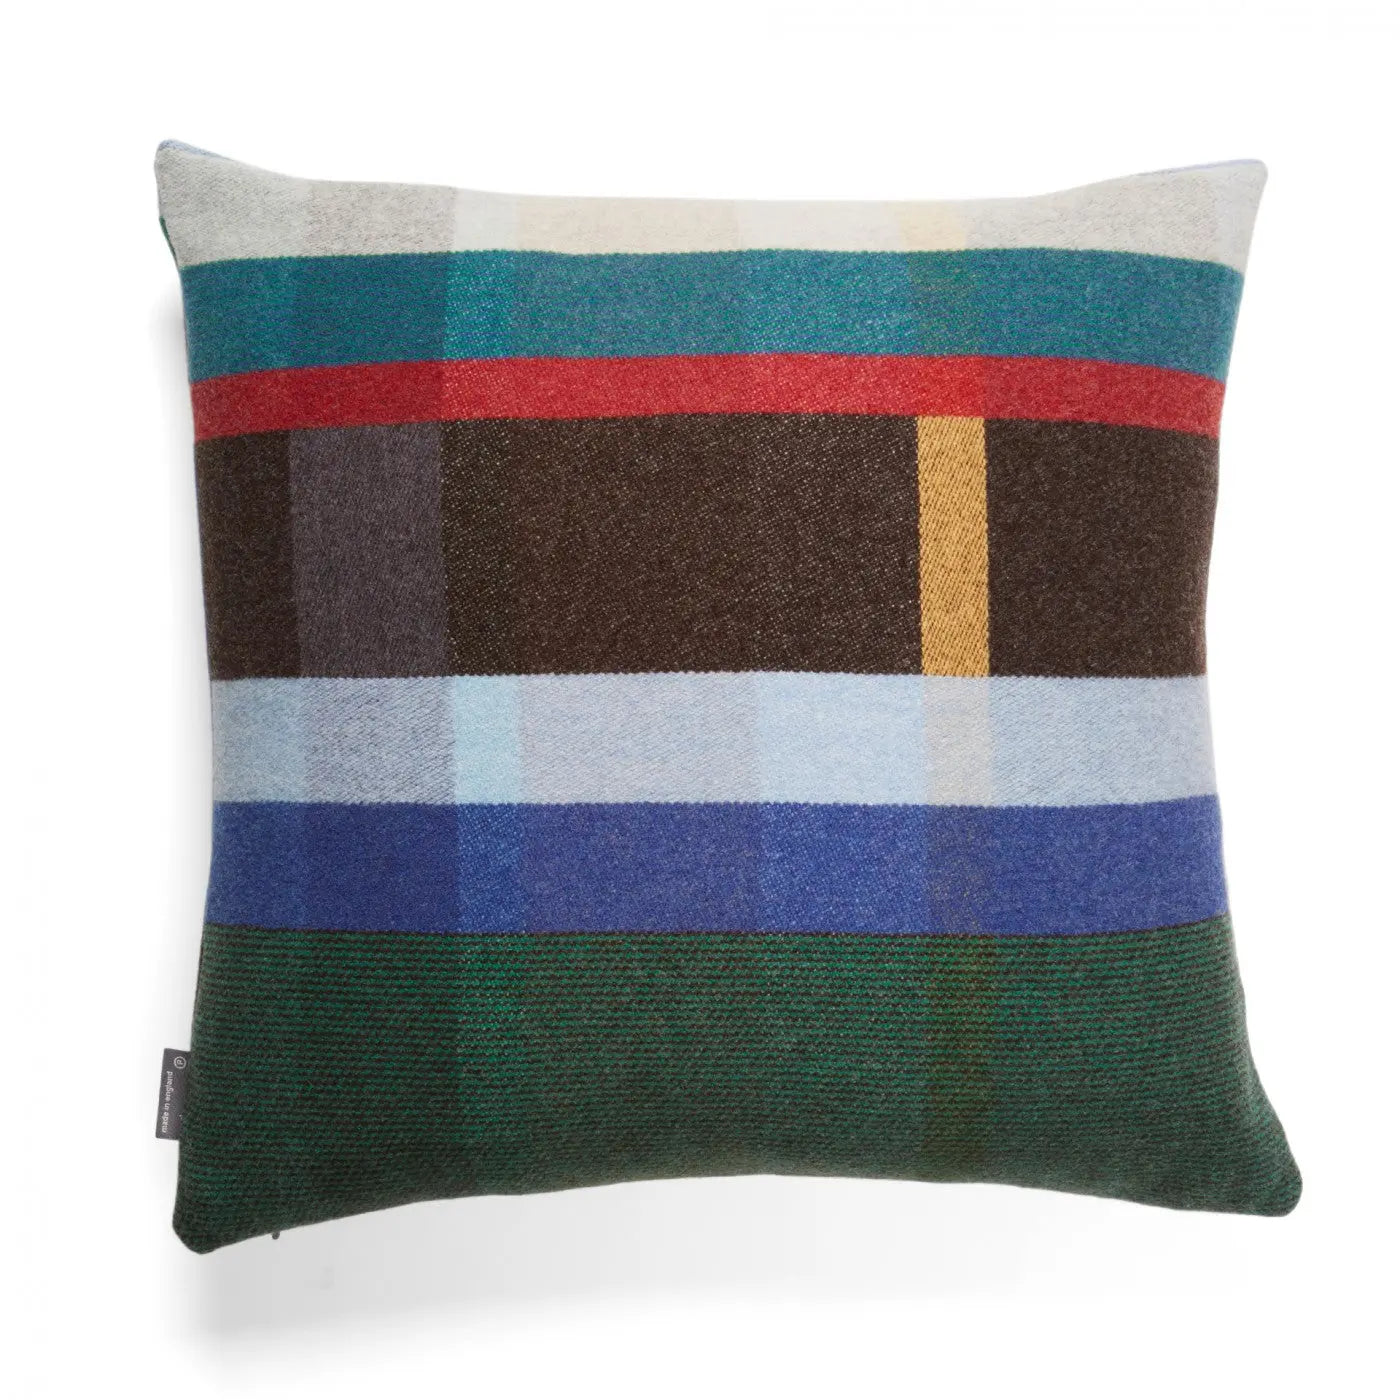 Wallace and Sewell-Antoni Cushion Wallace & Sewell